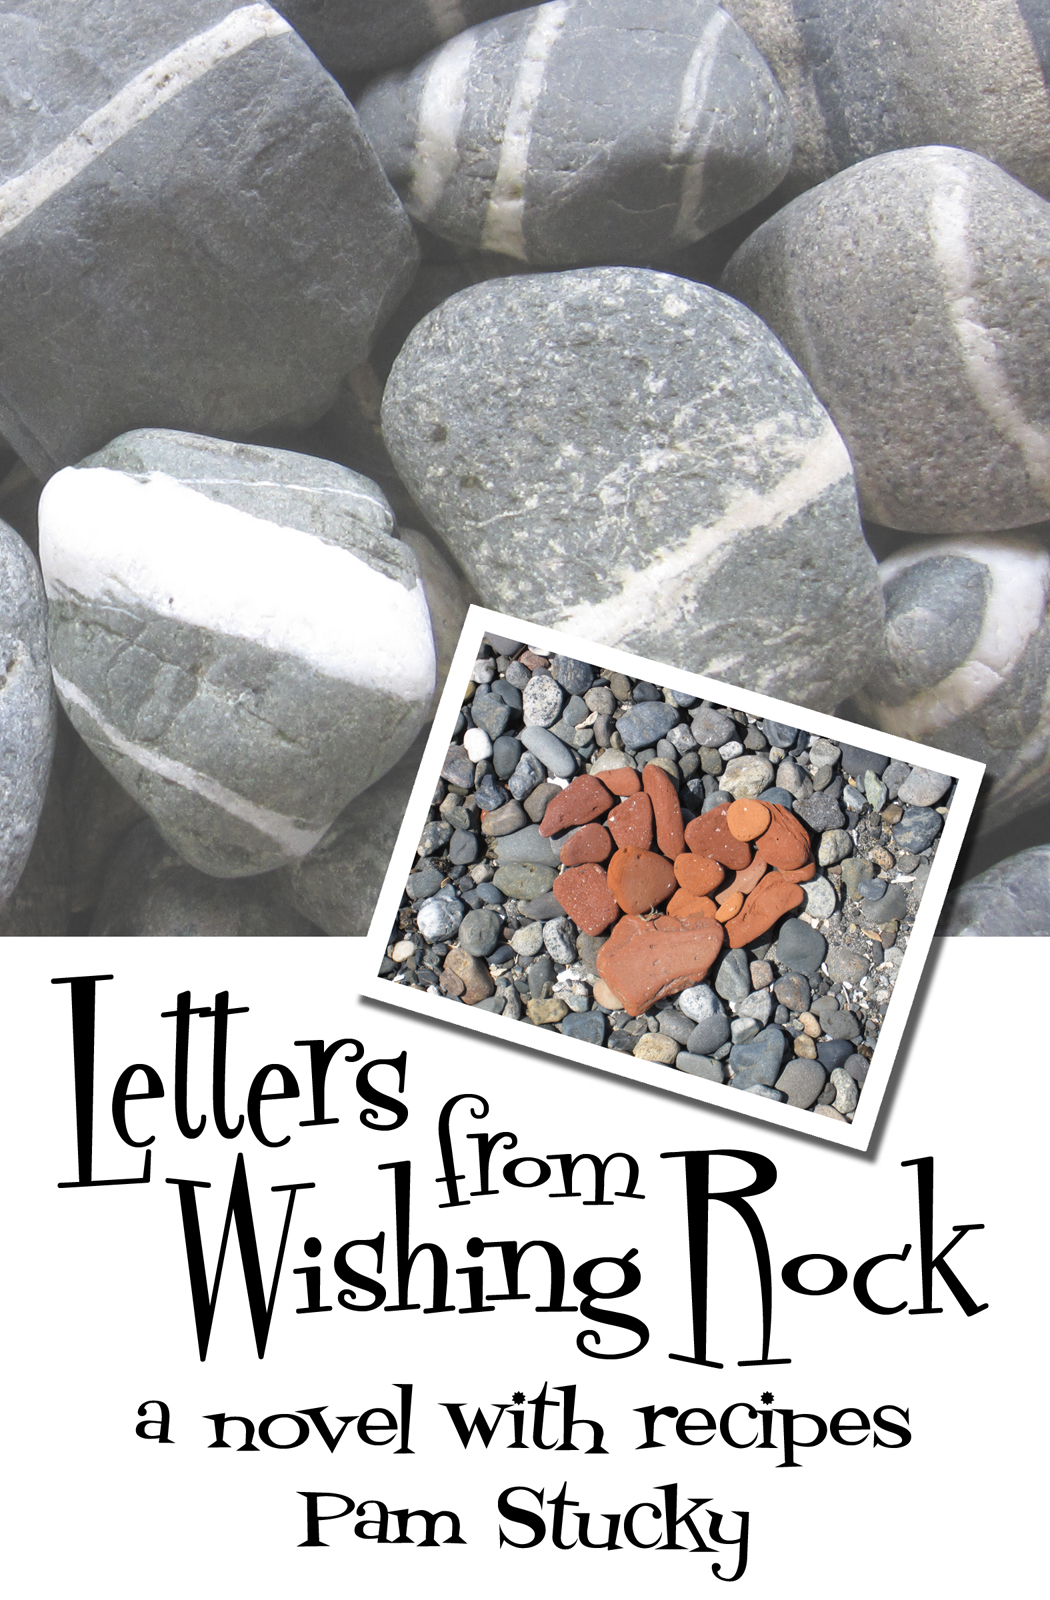 The inception of Wishing Rock